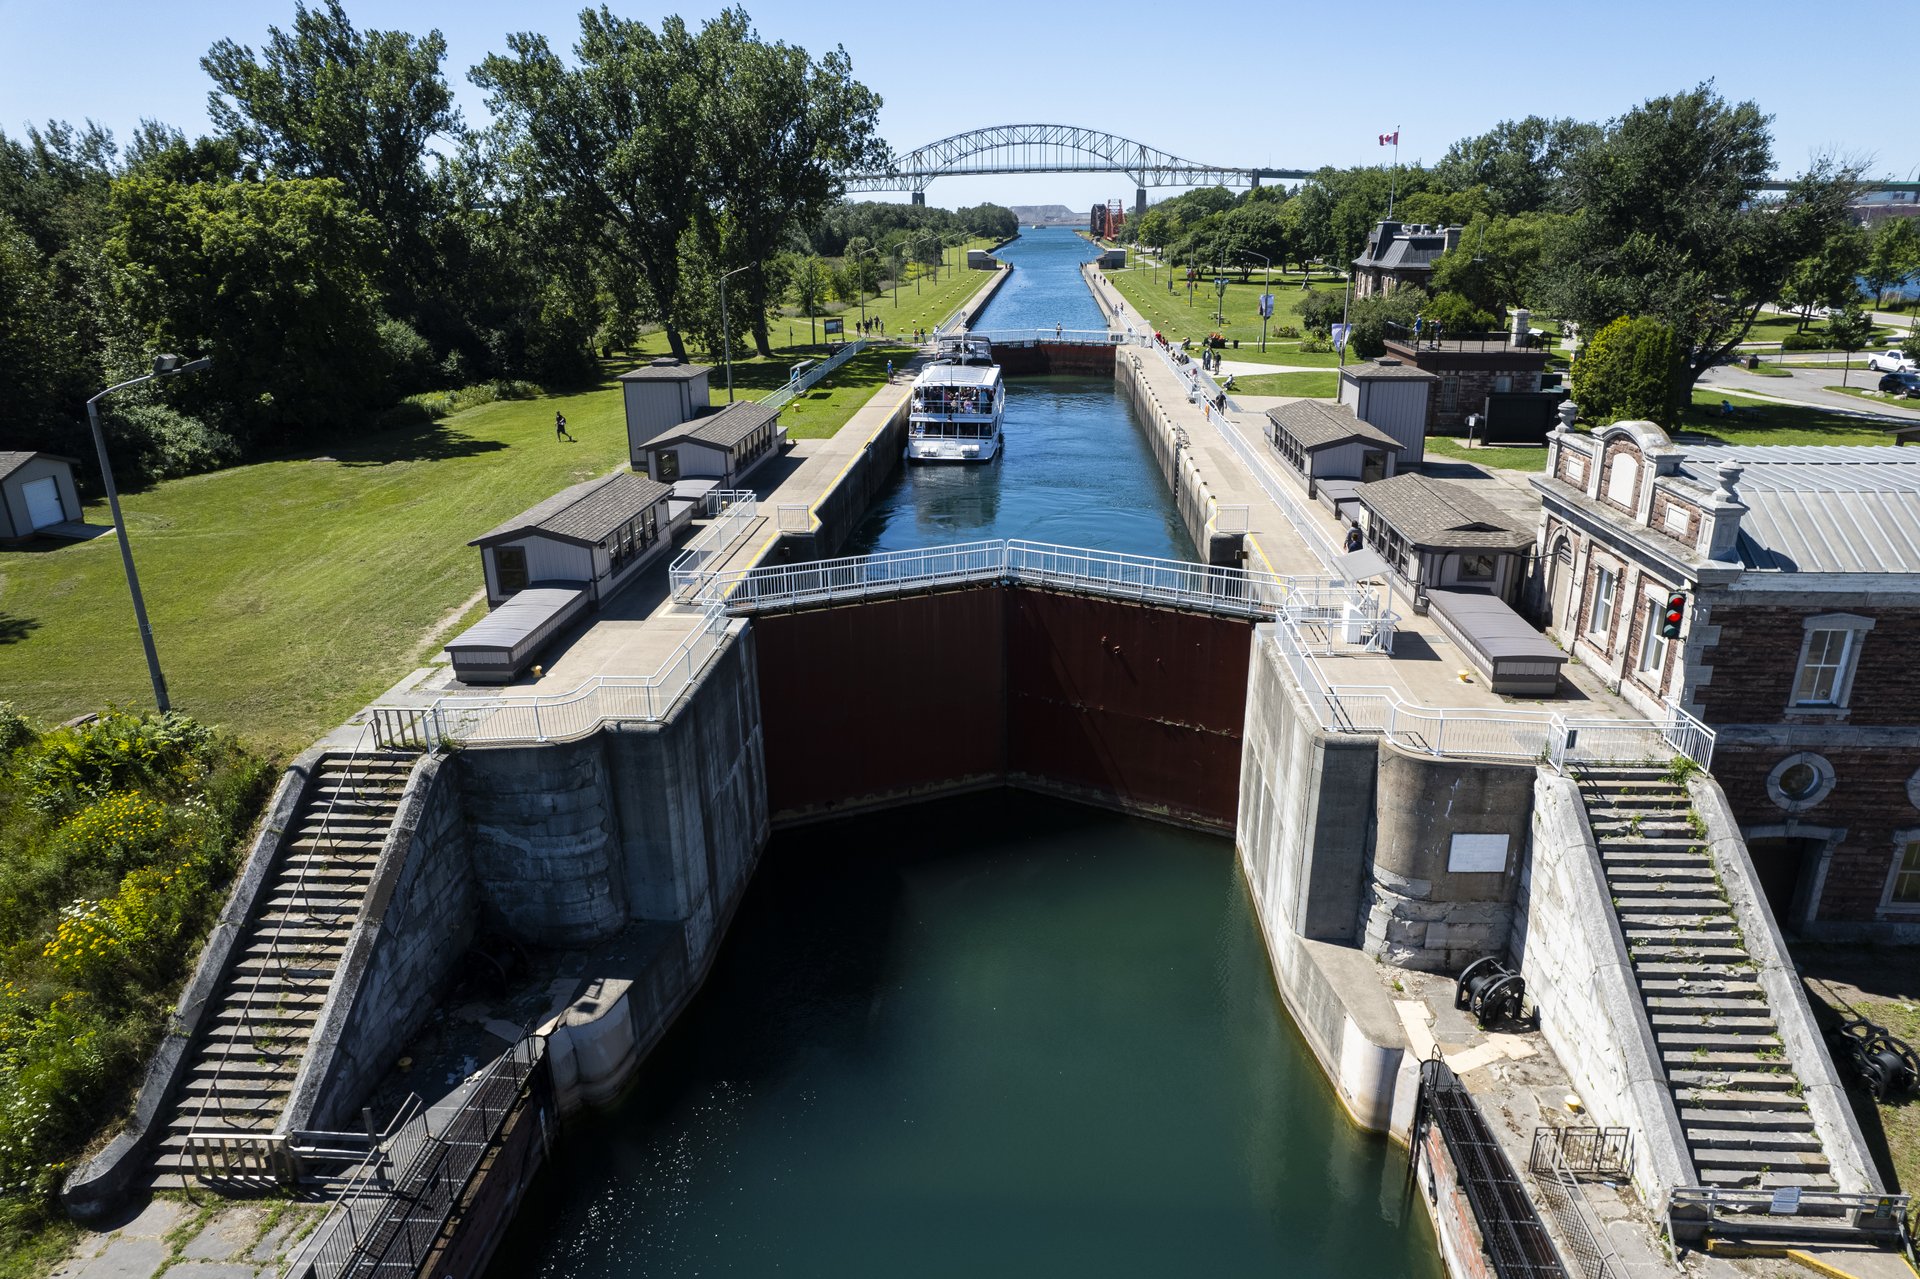 the Sault Ste. Marie Canal National Historic Site